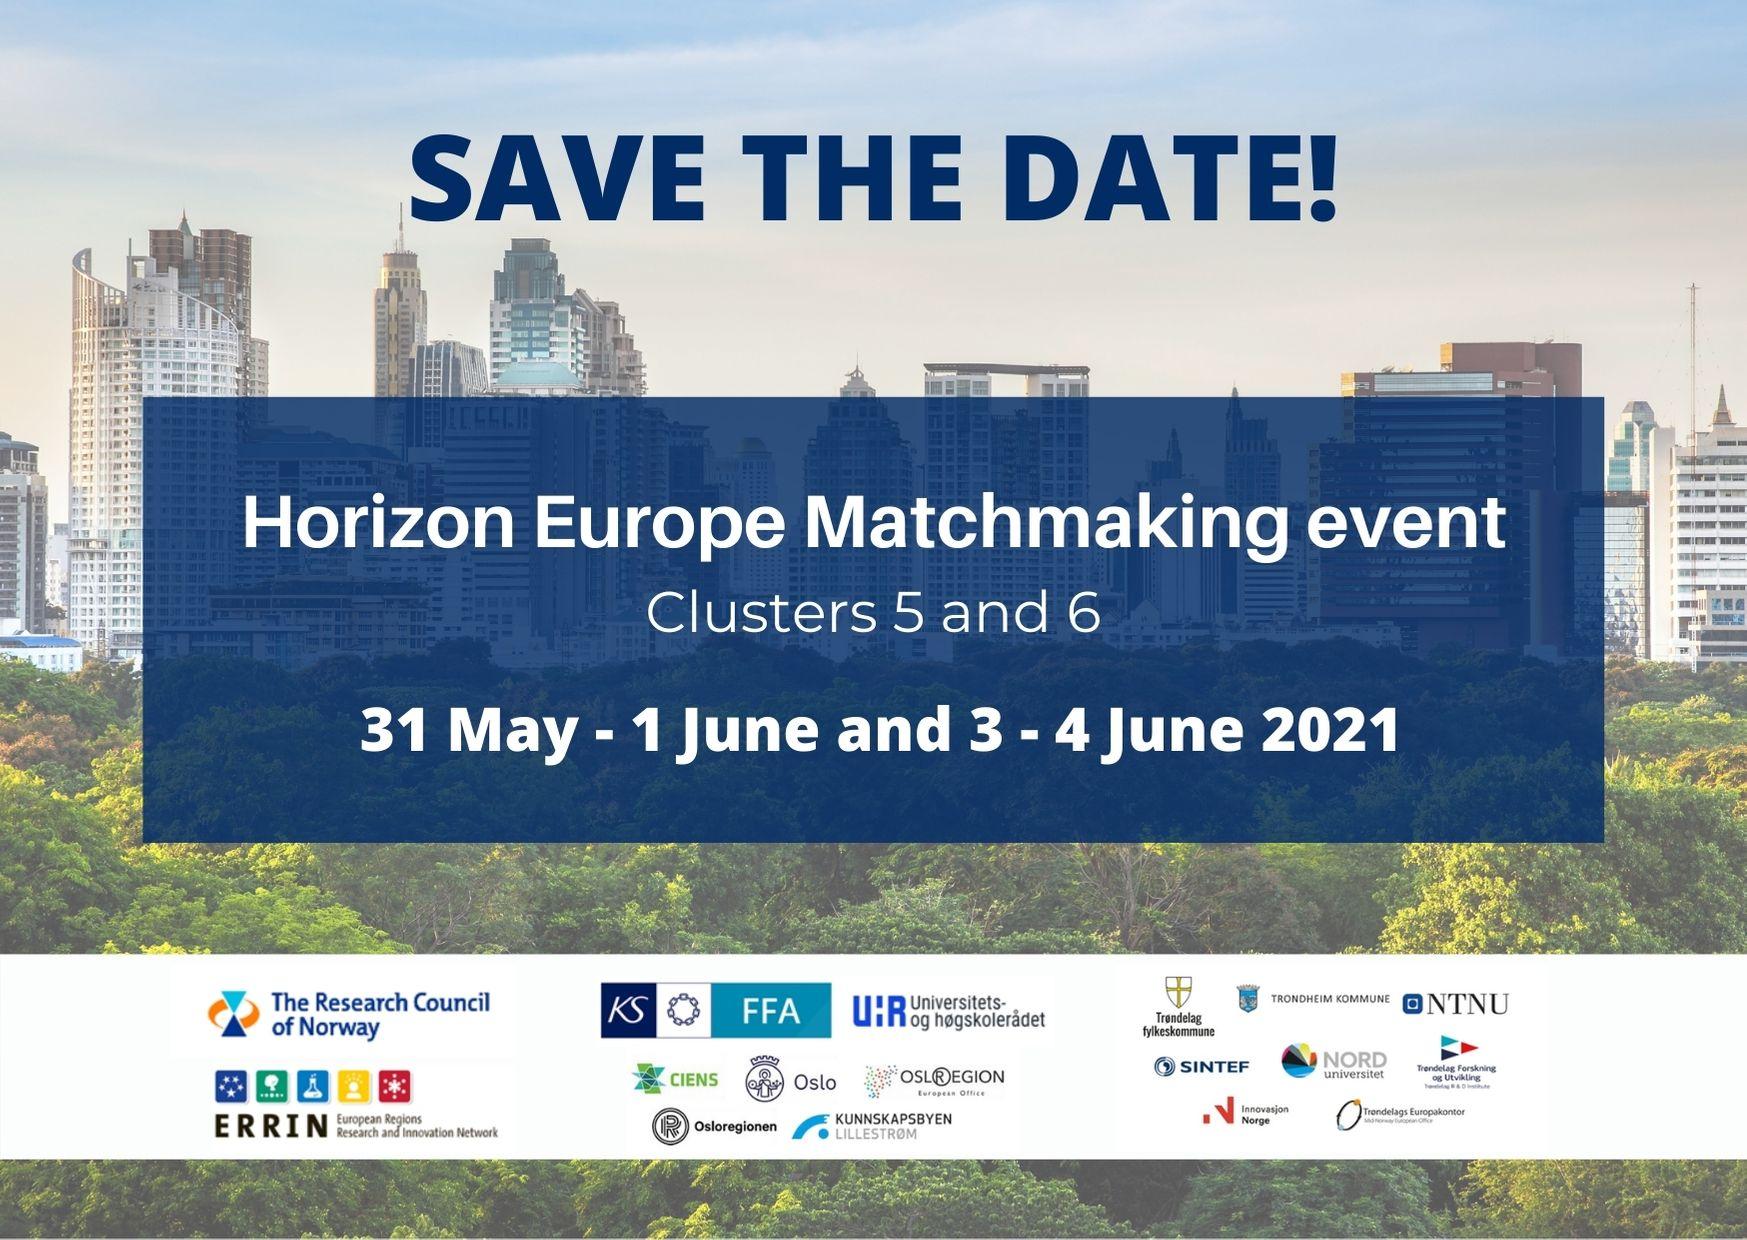 Horizon Europe Matchmaking event Clusters 5 and 6 2021 04 19 8497